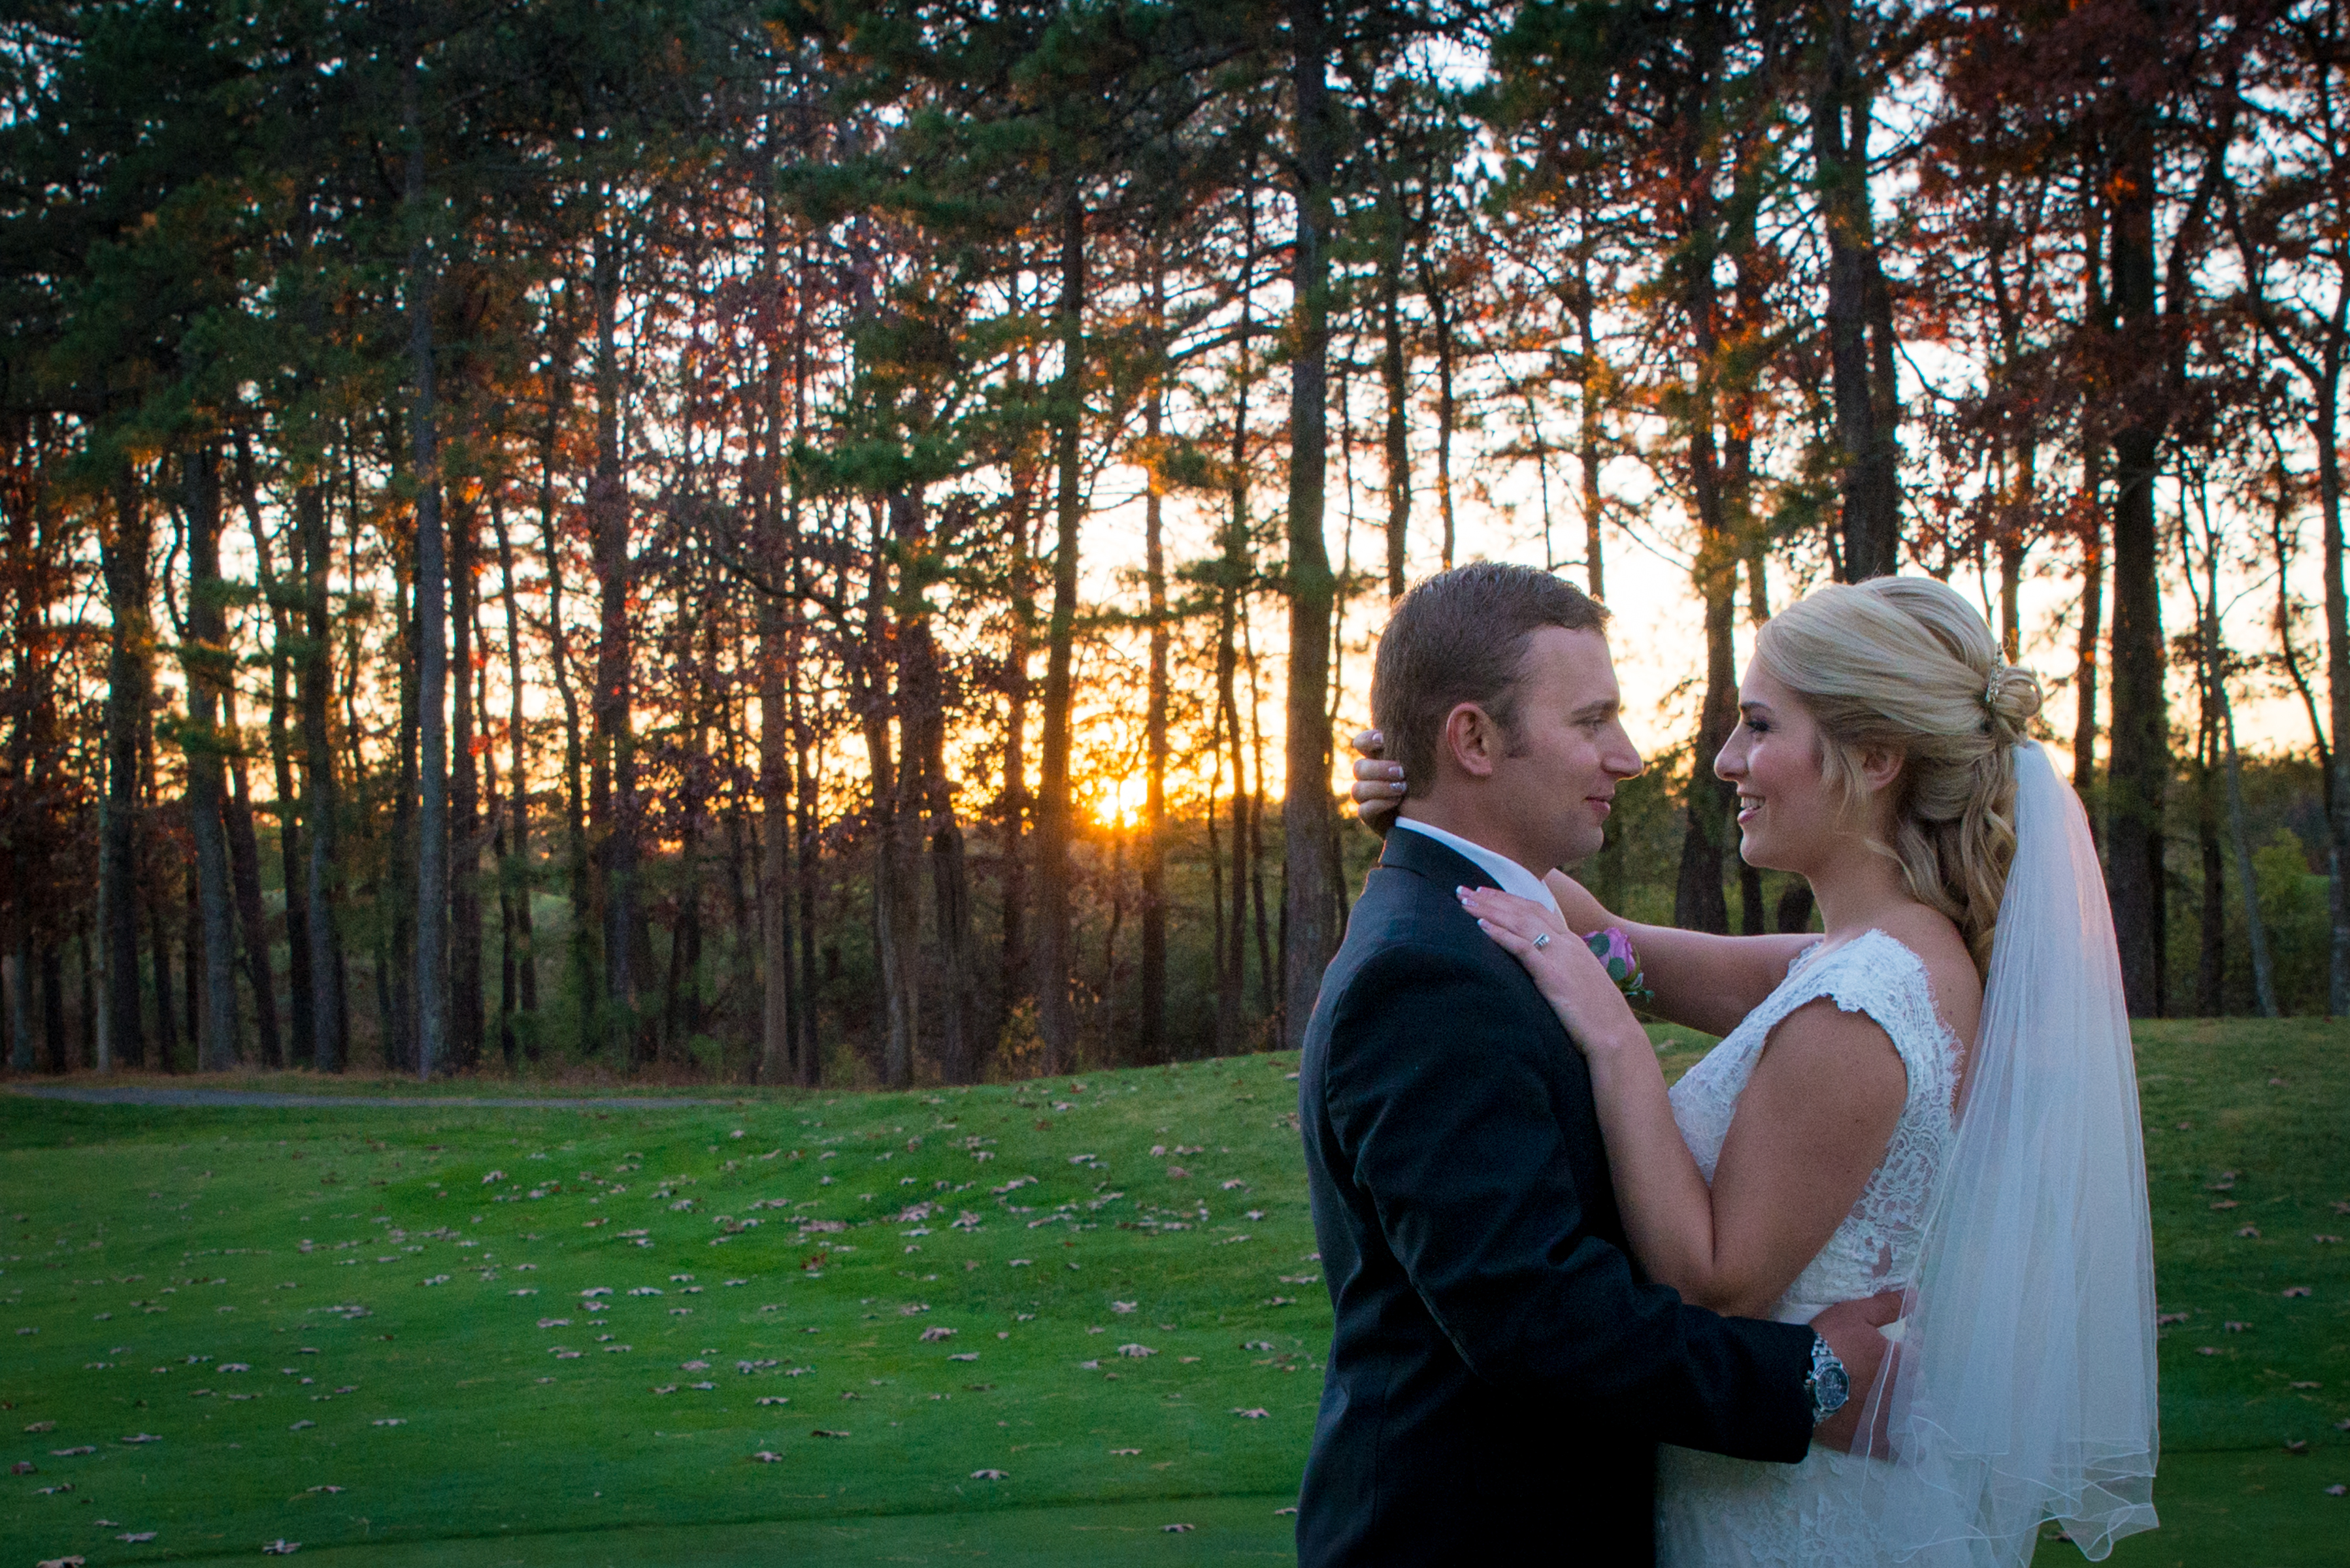 best wedding photography packages in NJ